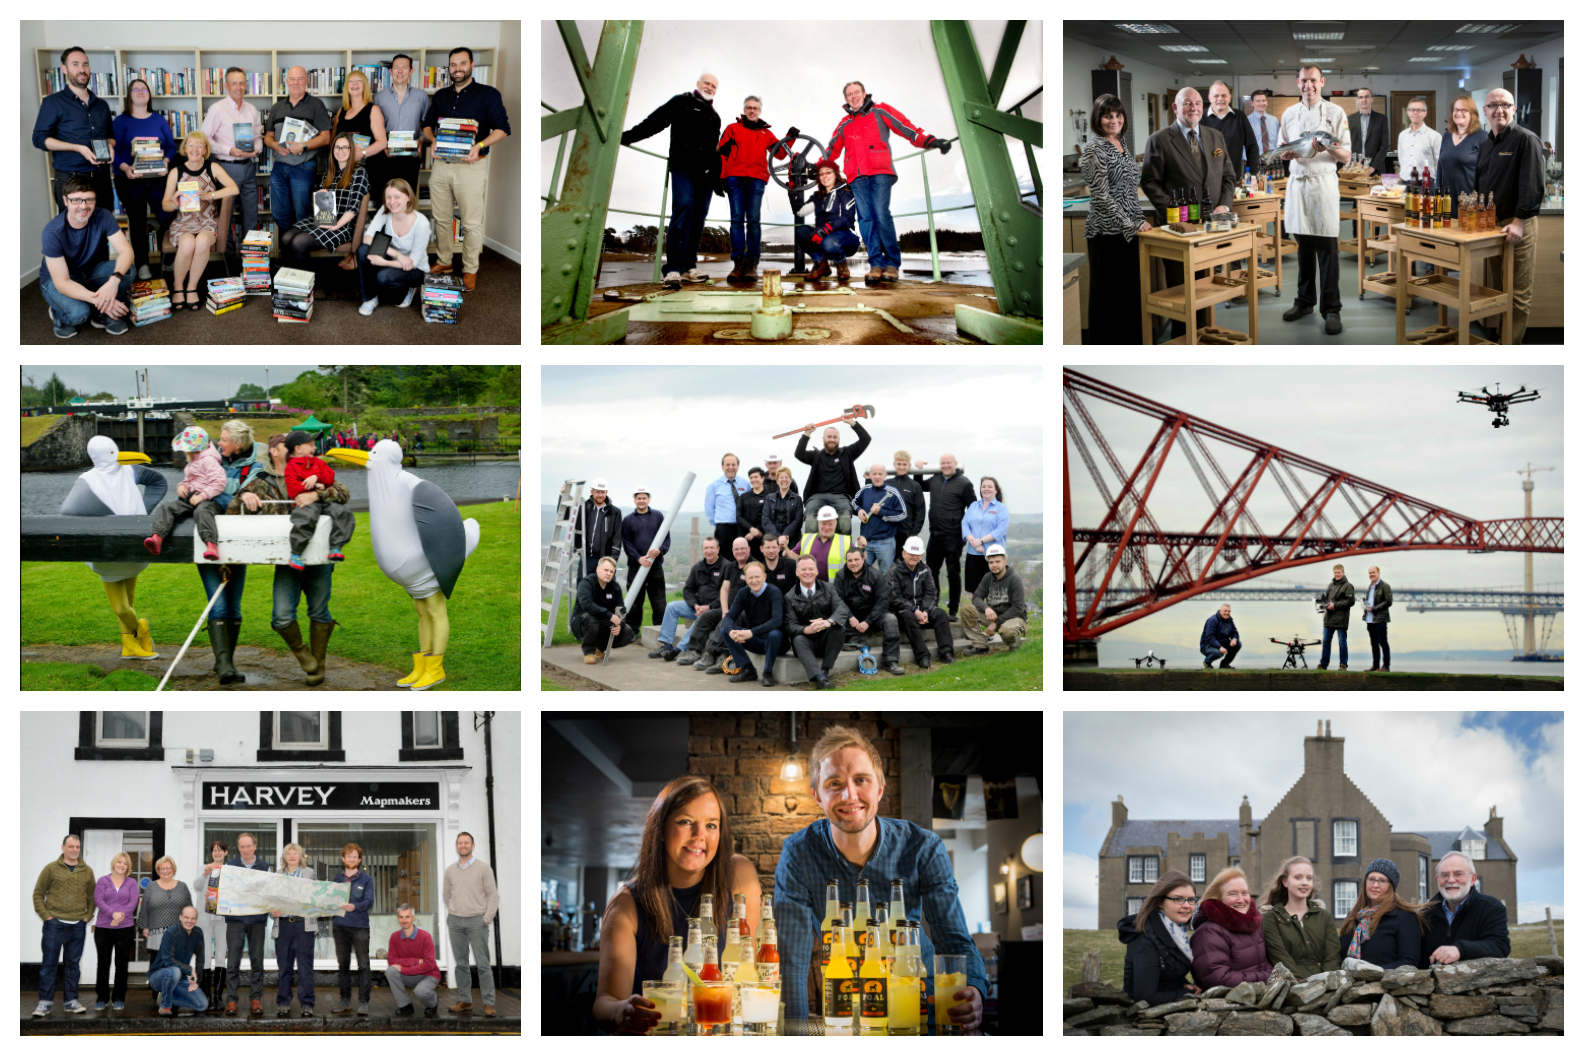 Some of Scotland's consortium co-operatives, community co-operatives and employee-owned businesses